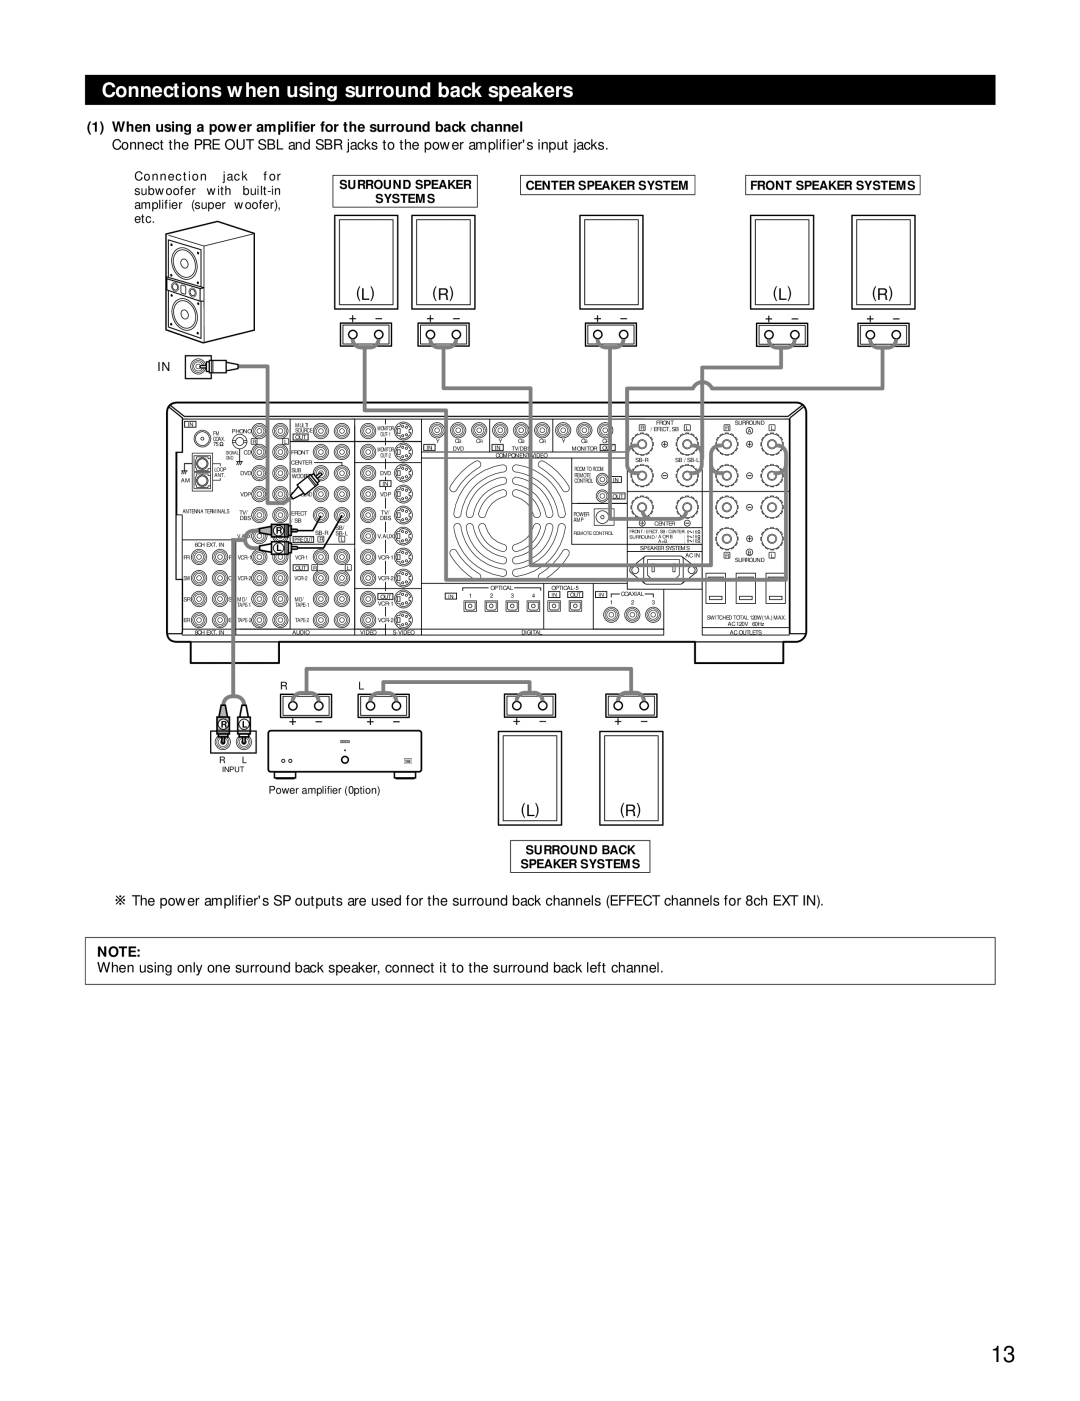 Denon AVR-4800 manual Connections when using surround back speakers, Center Speaker System, Front Speaker Systems 